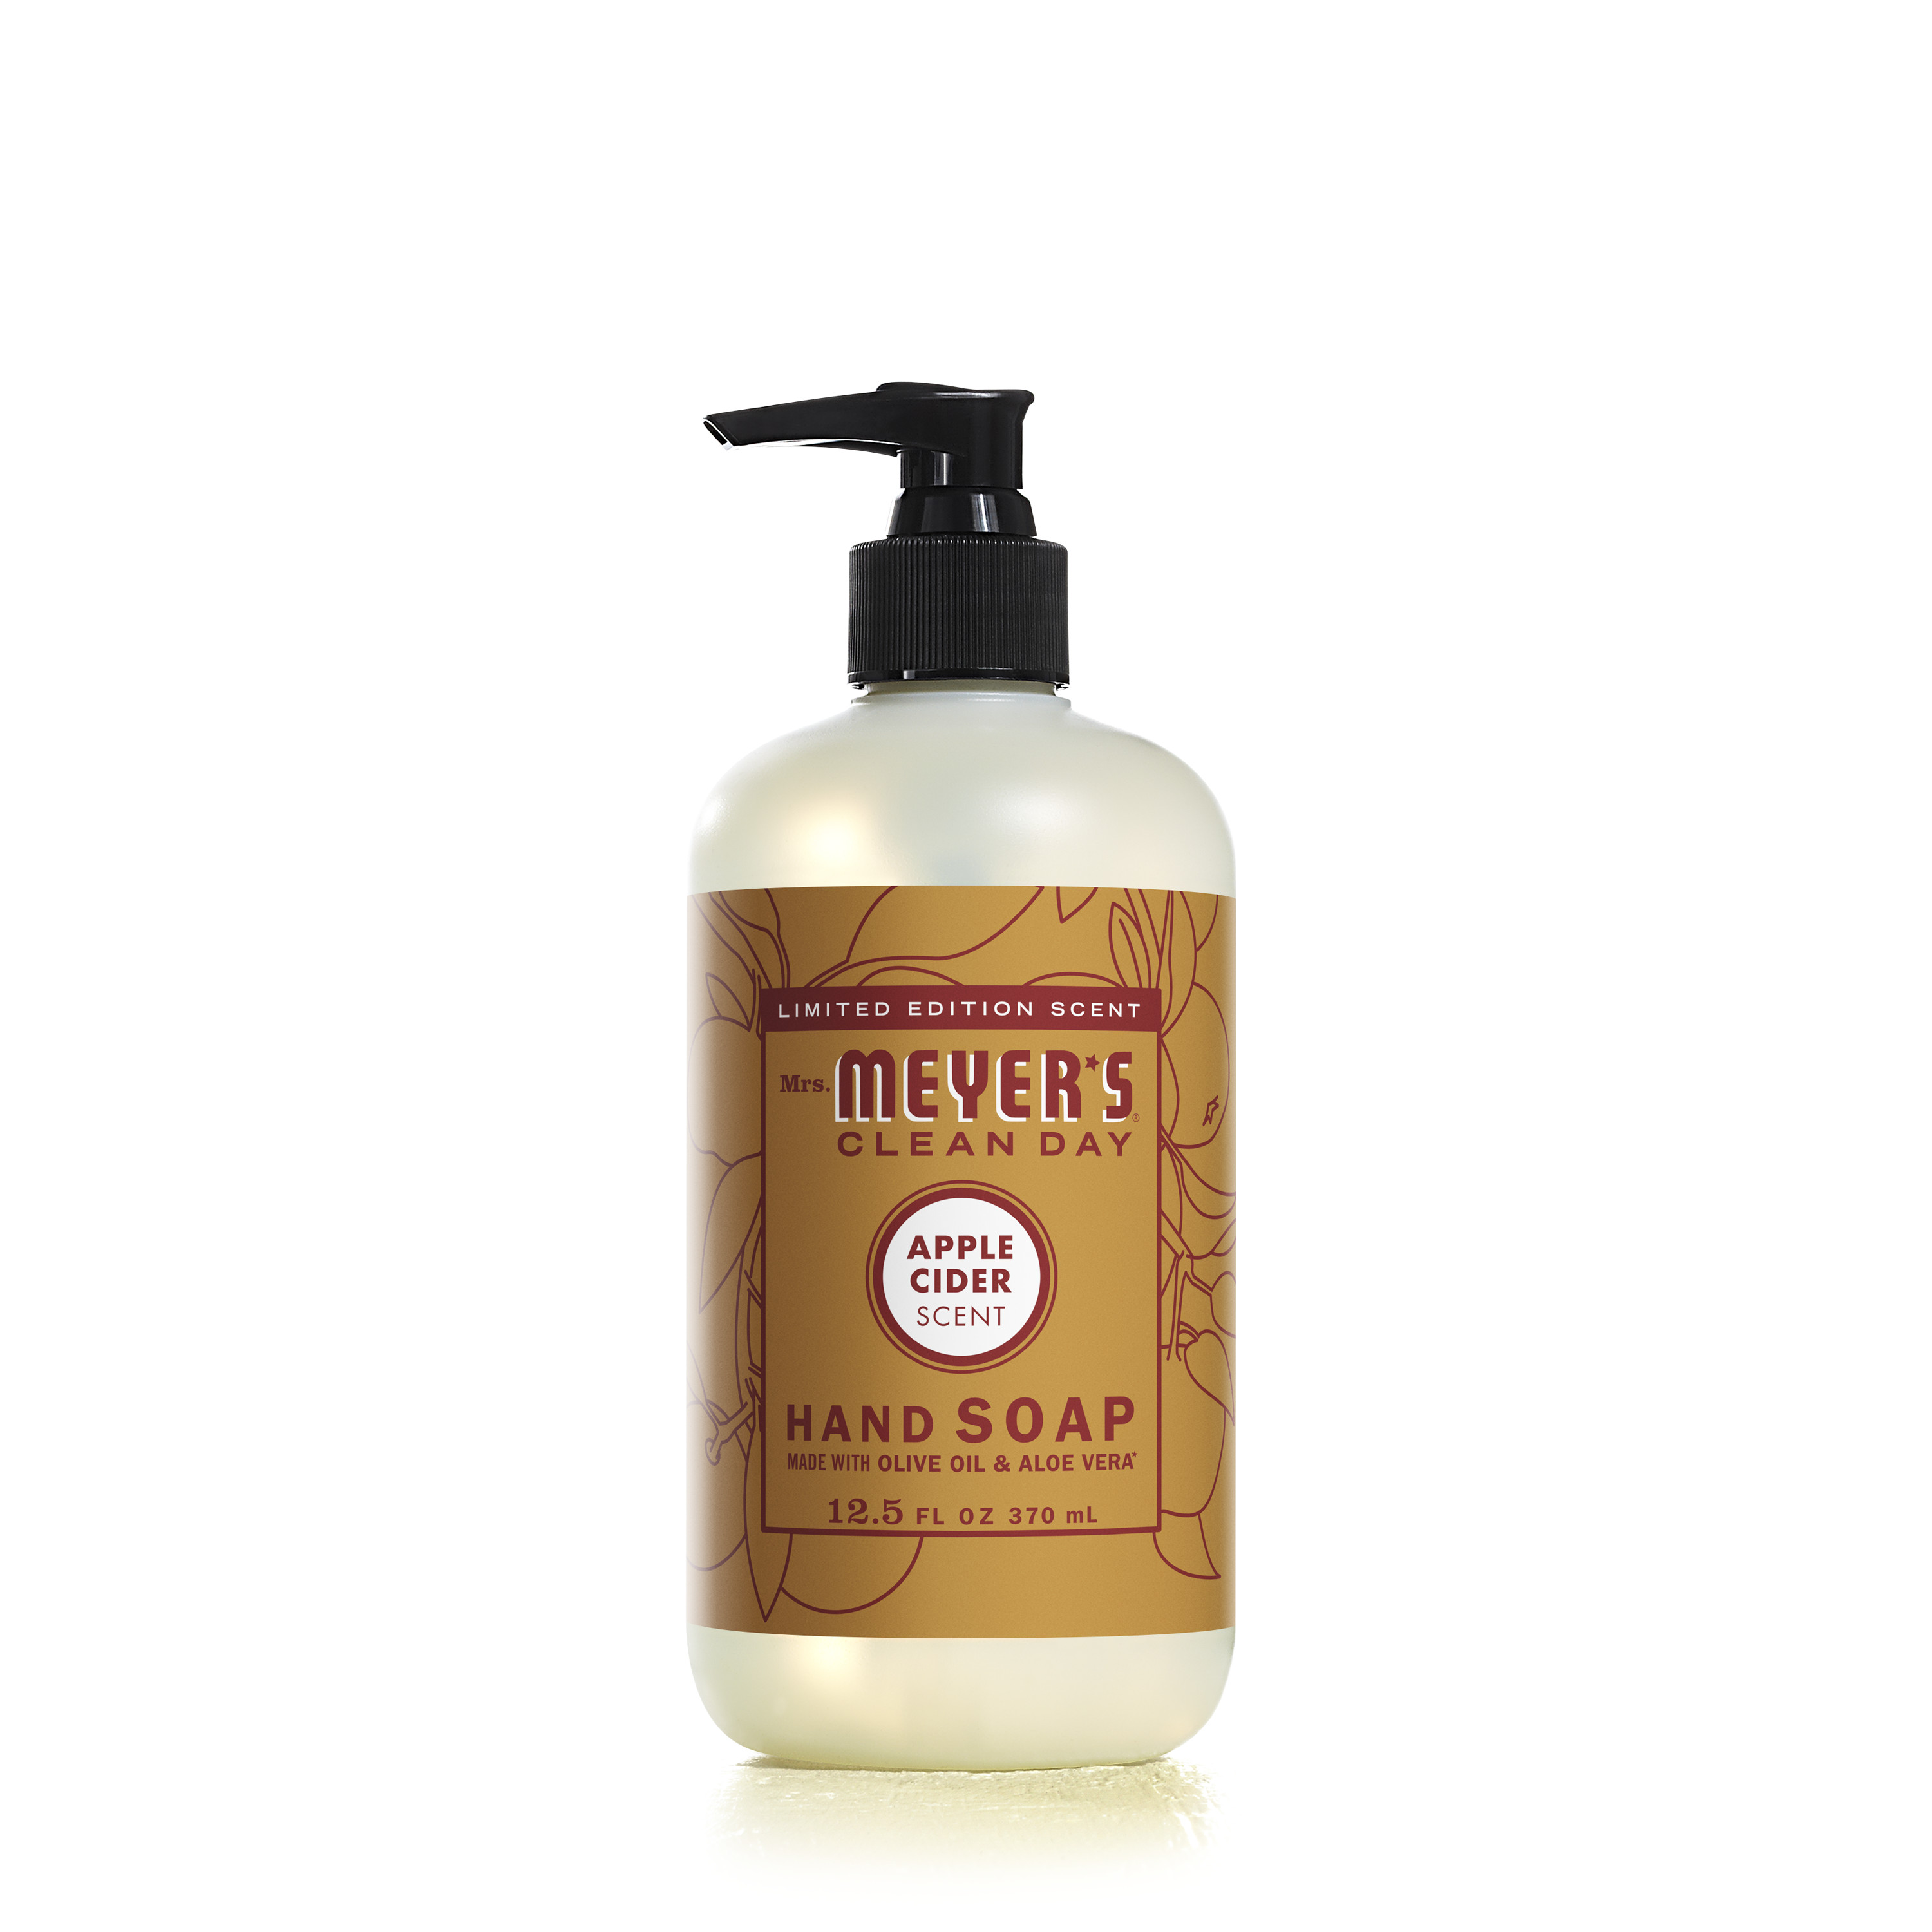 Mrs. Meyer's Clean Day Liquid Hand Soap, Apple Cider Scent, 12.5 Ounce Bottle - image 4 of 7